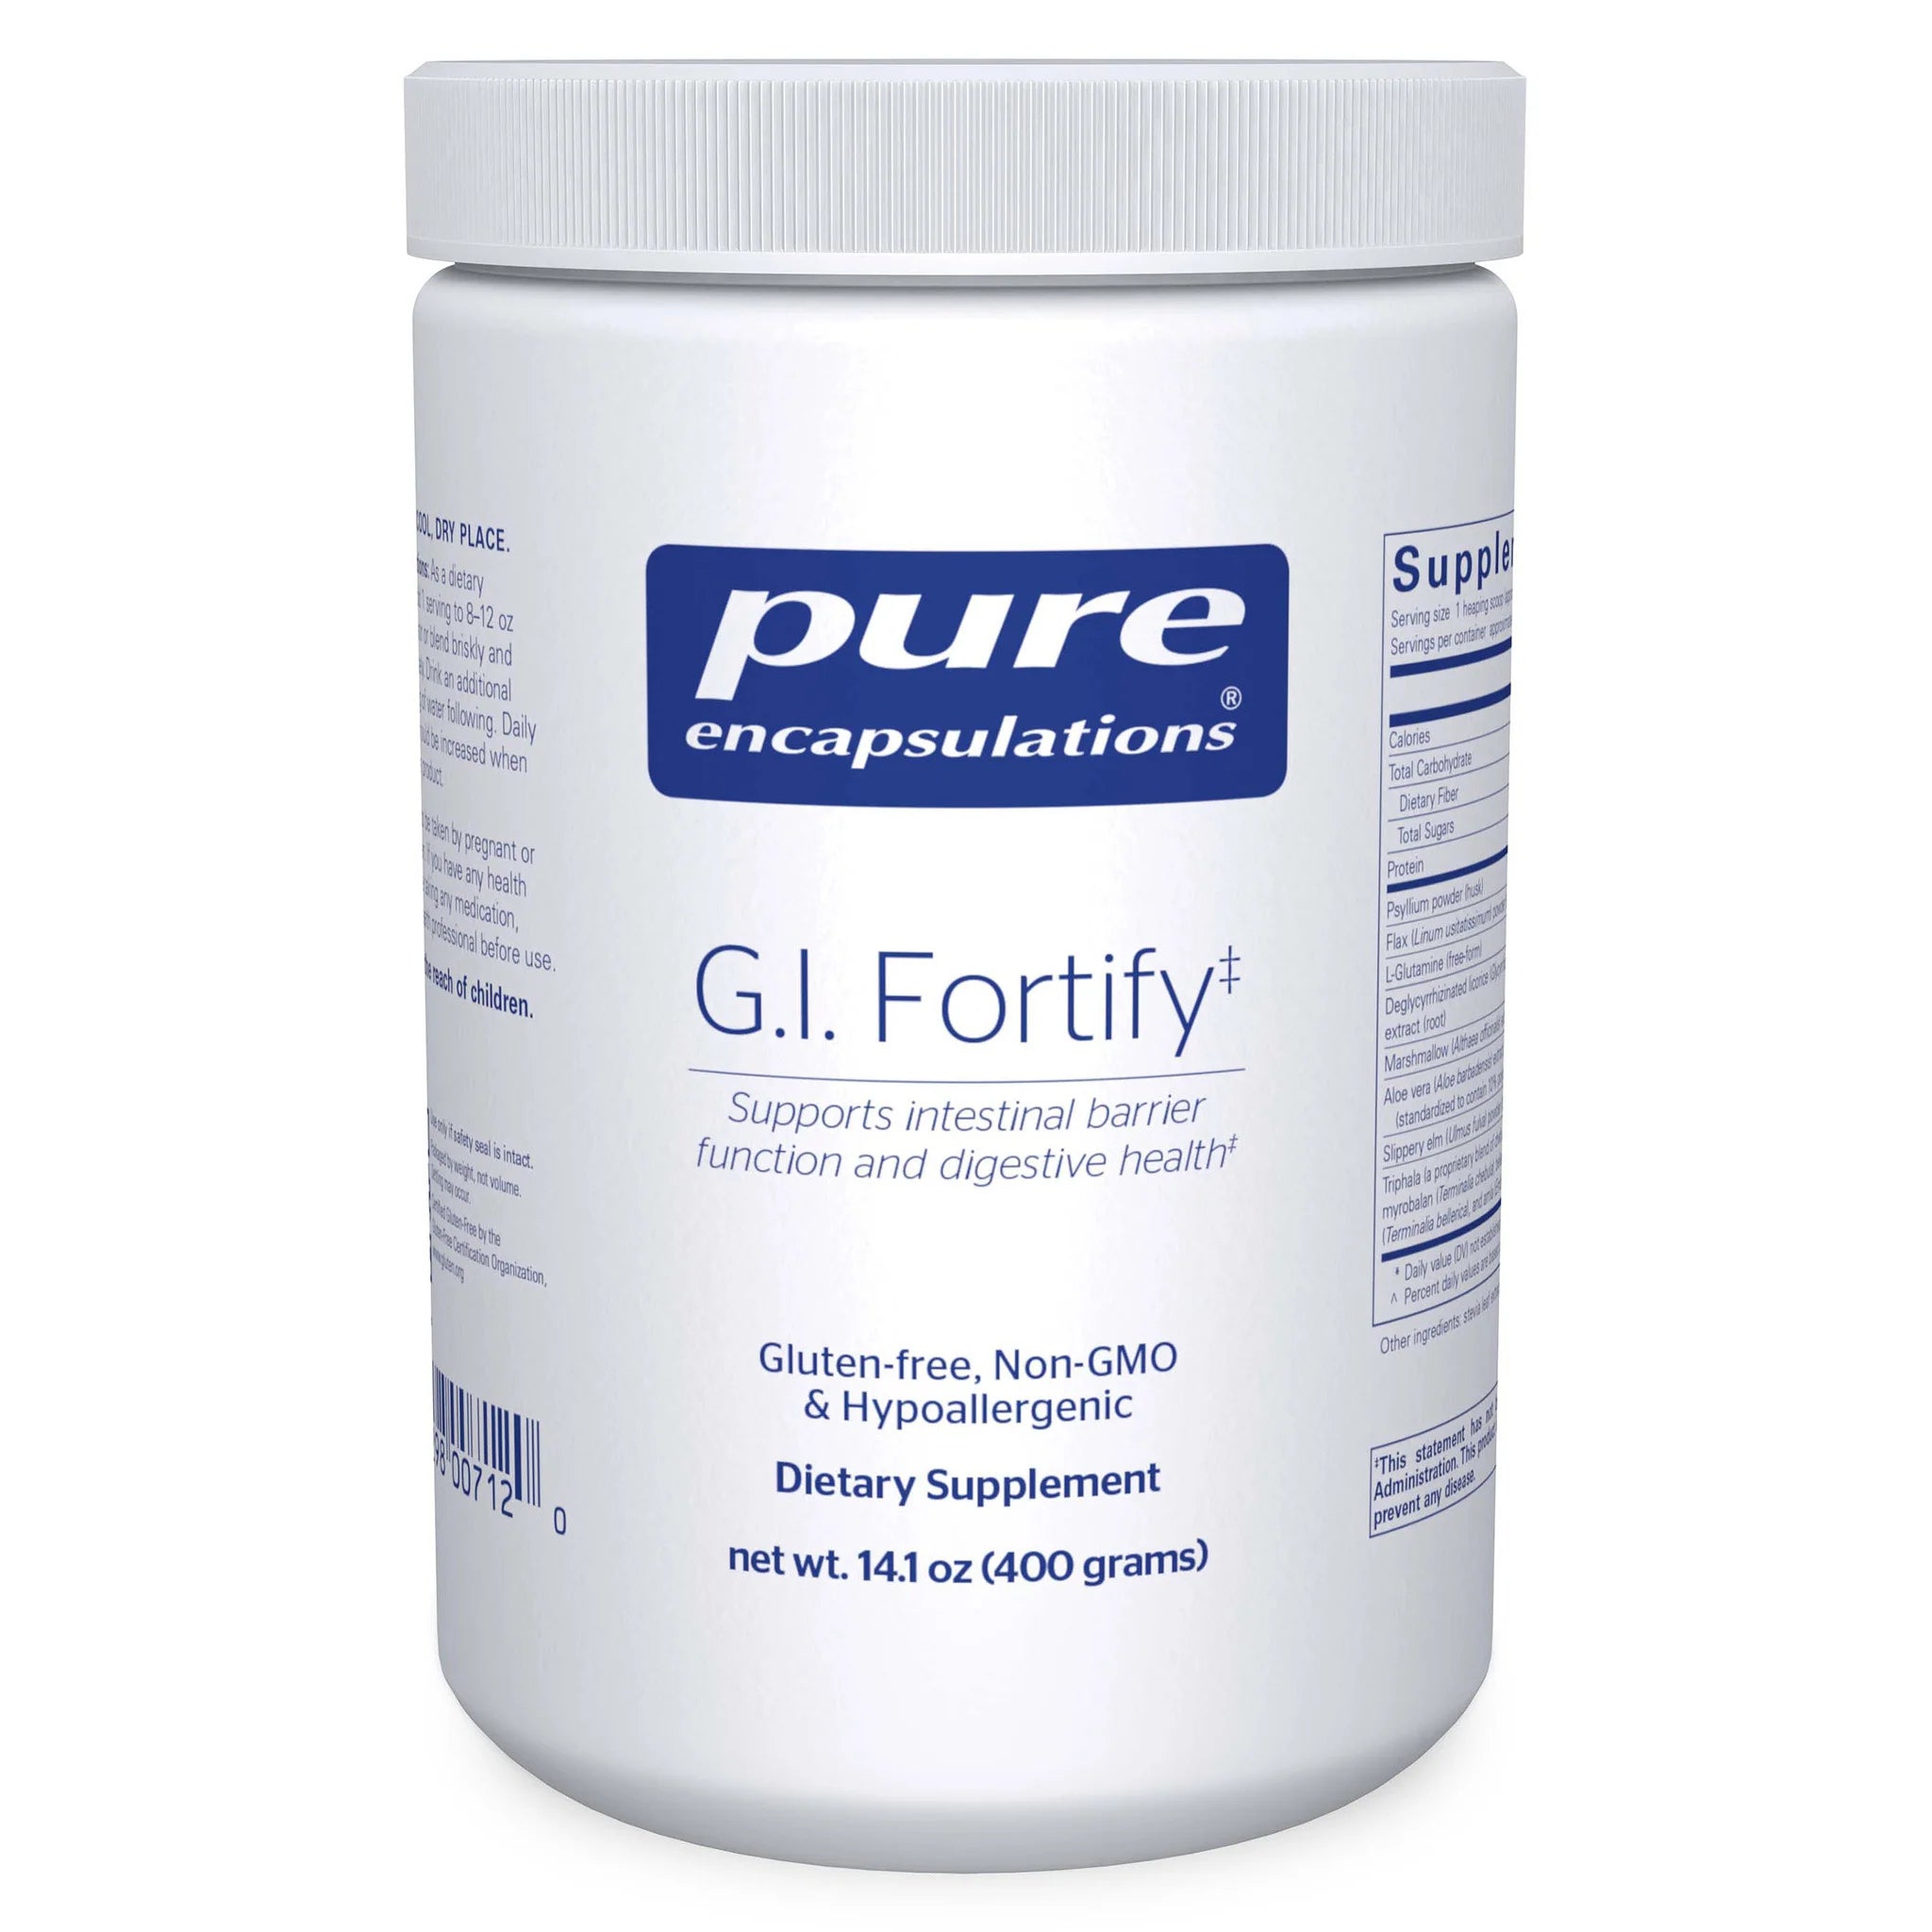 G.I Fortify